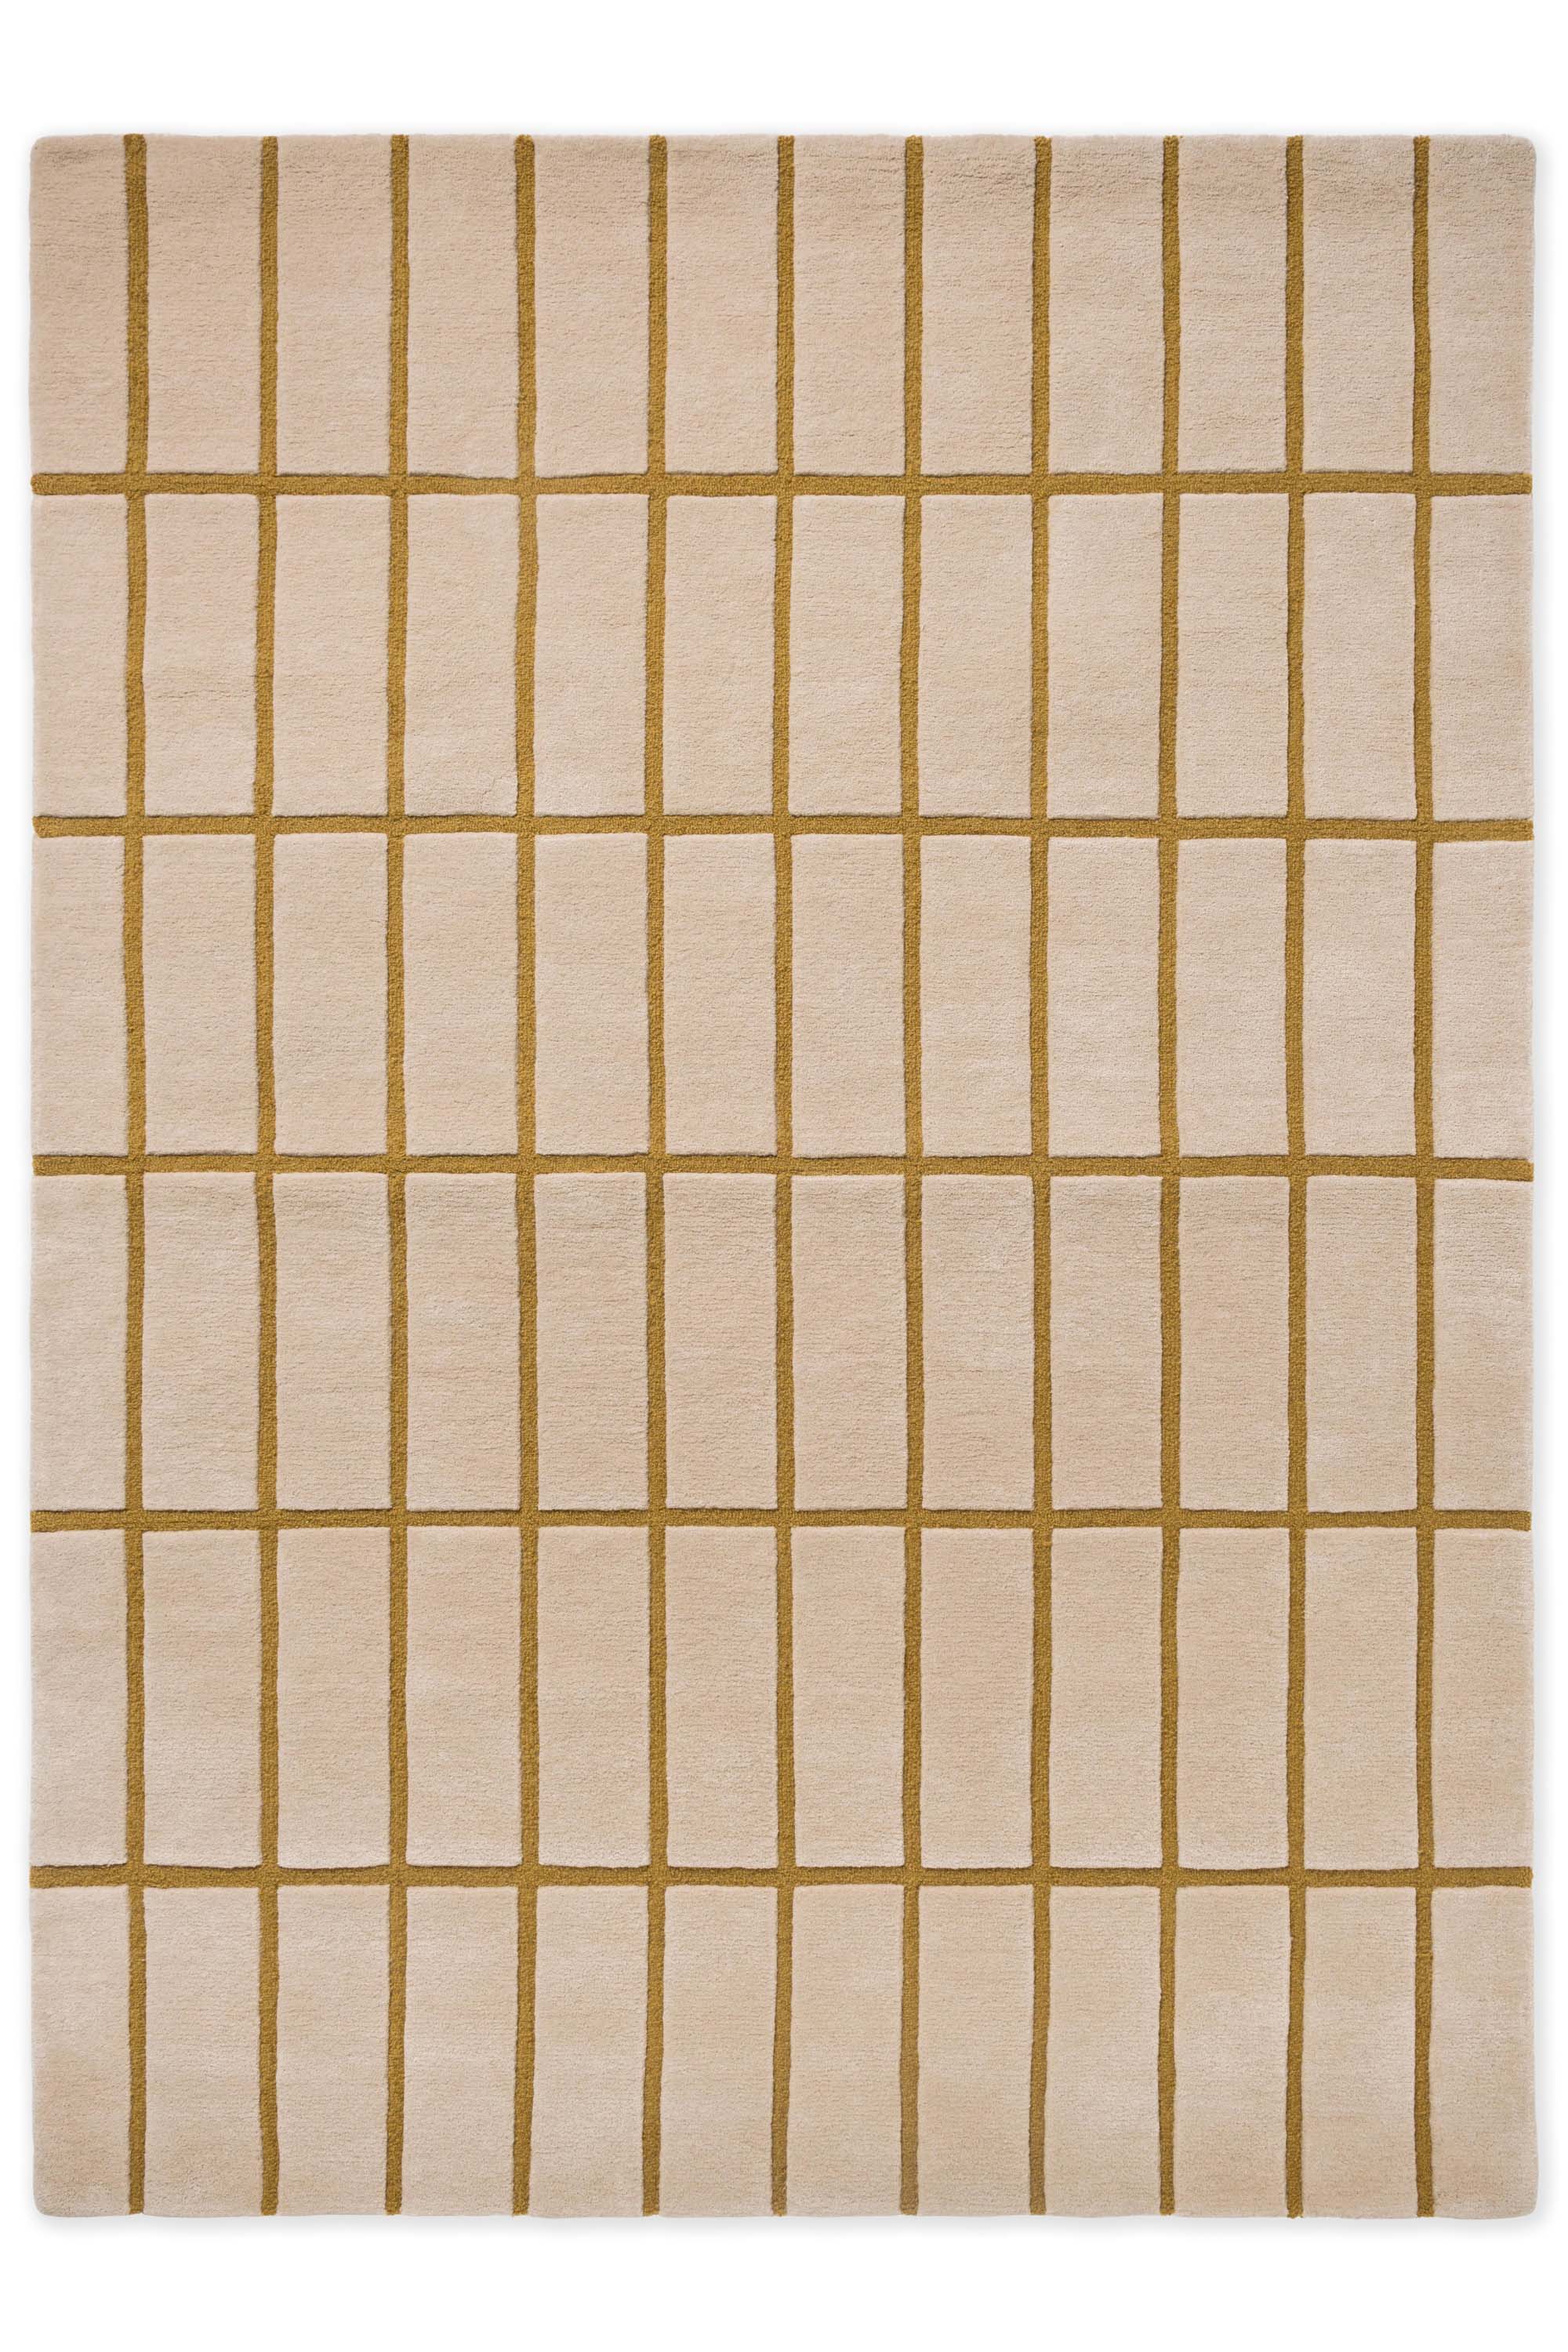 Geometric rug with yellow grid pattern